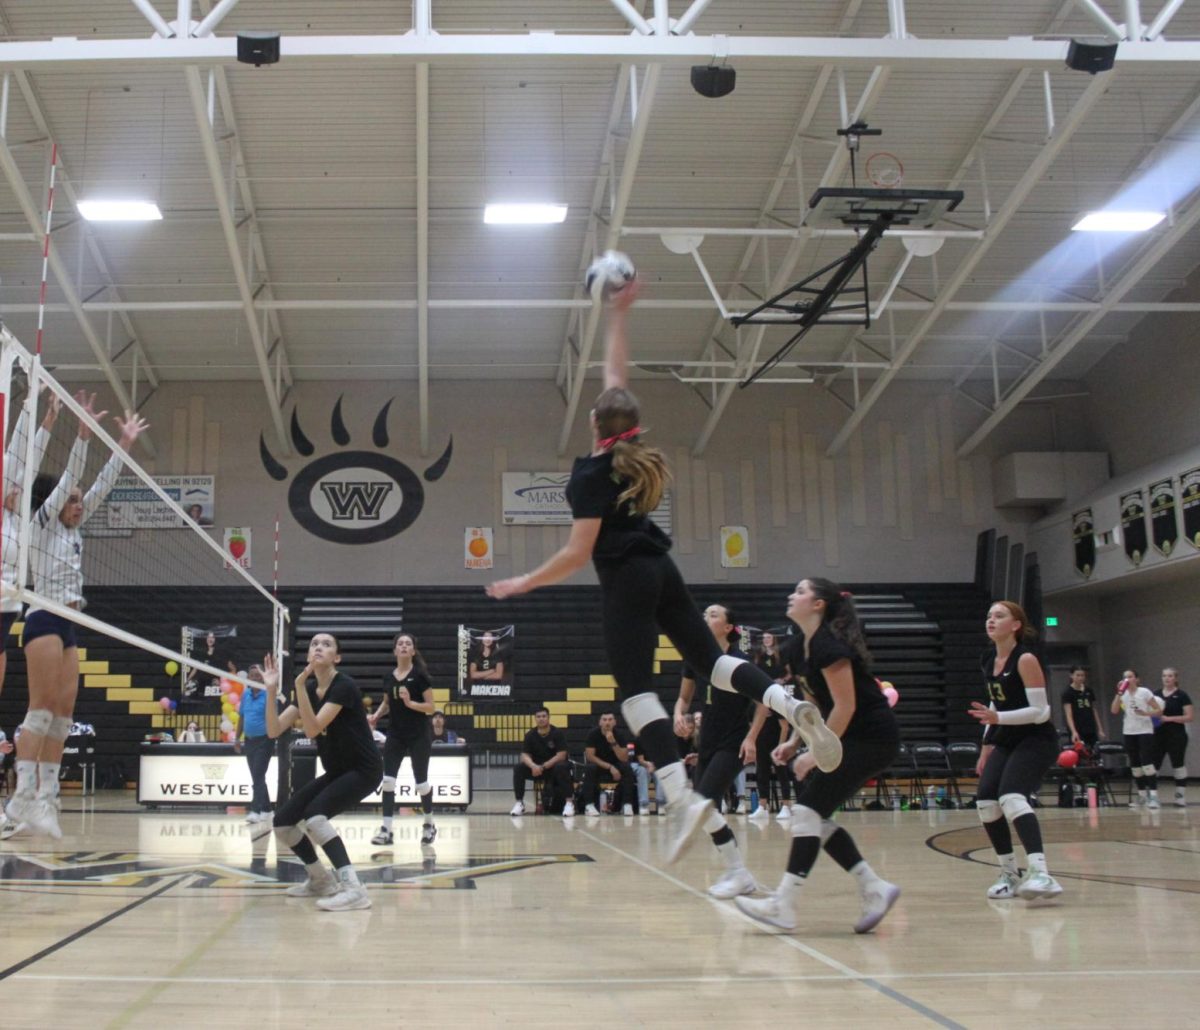 Vivian Roberts (10) leaps into the air to strike the volleyball that was set by Ava Zamora (11), scoring a point for Westview, Oct. 20. The team was celebrating their senior night together at their latest home game against San Marcos, and after an intense match, the team lost 3-1.